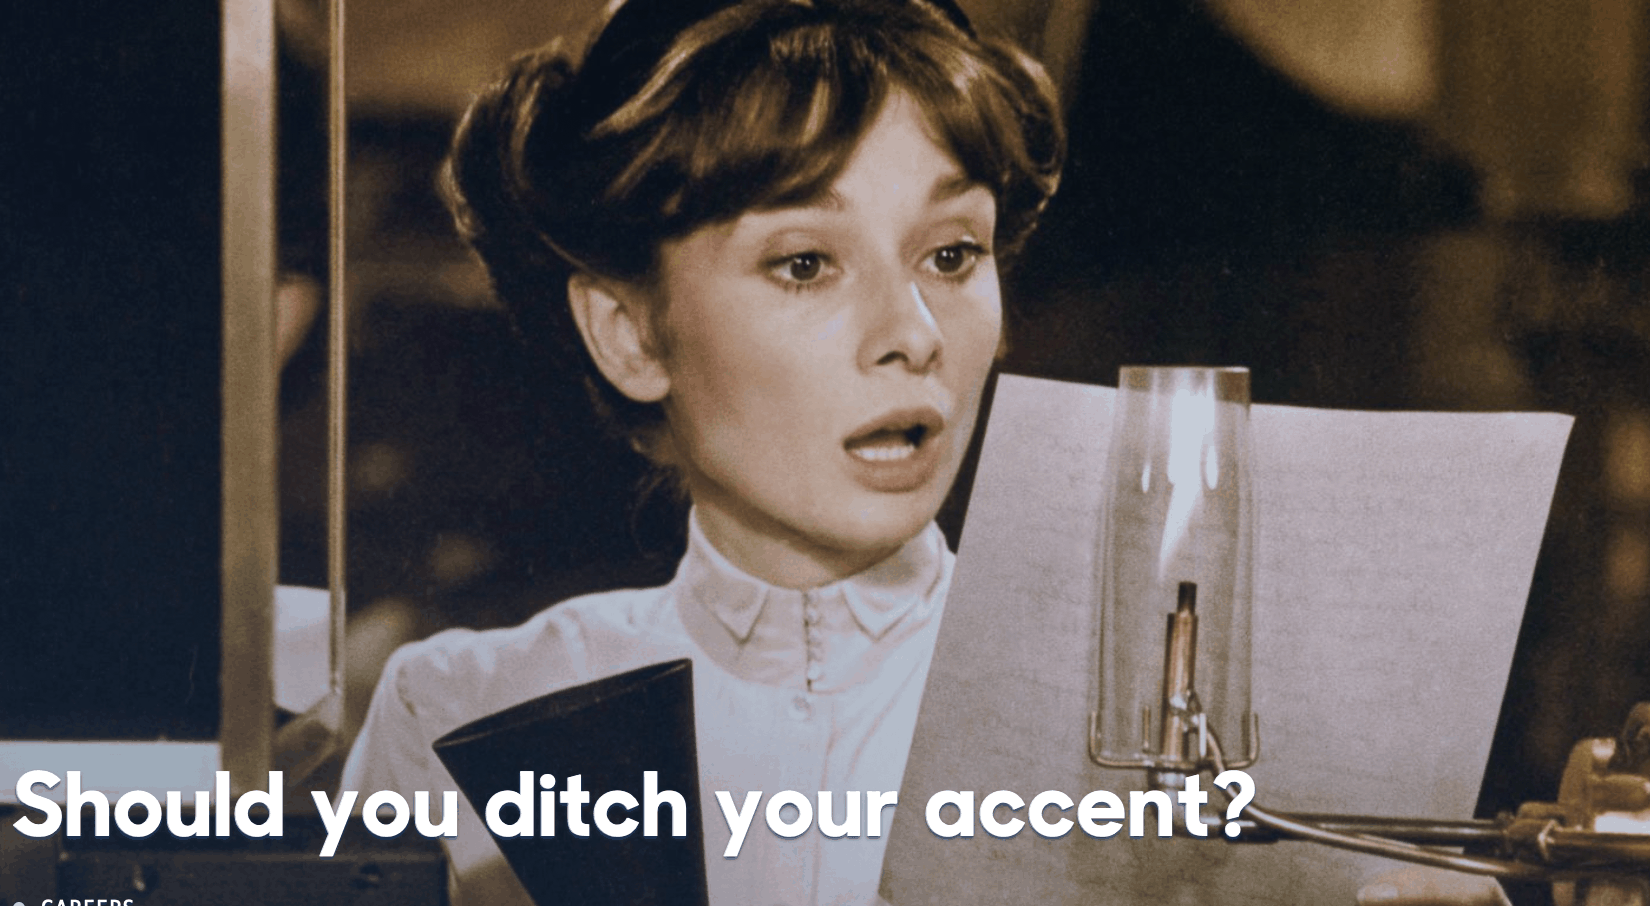 Should you ditch your accent?